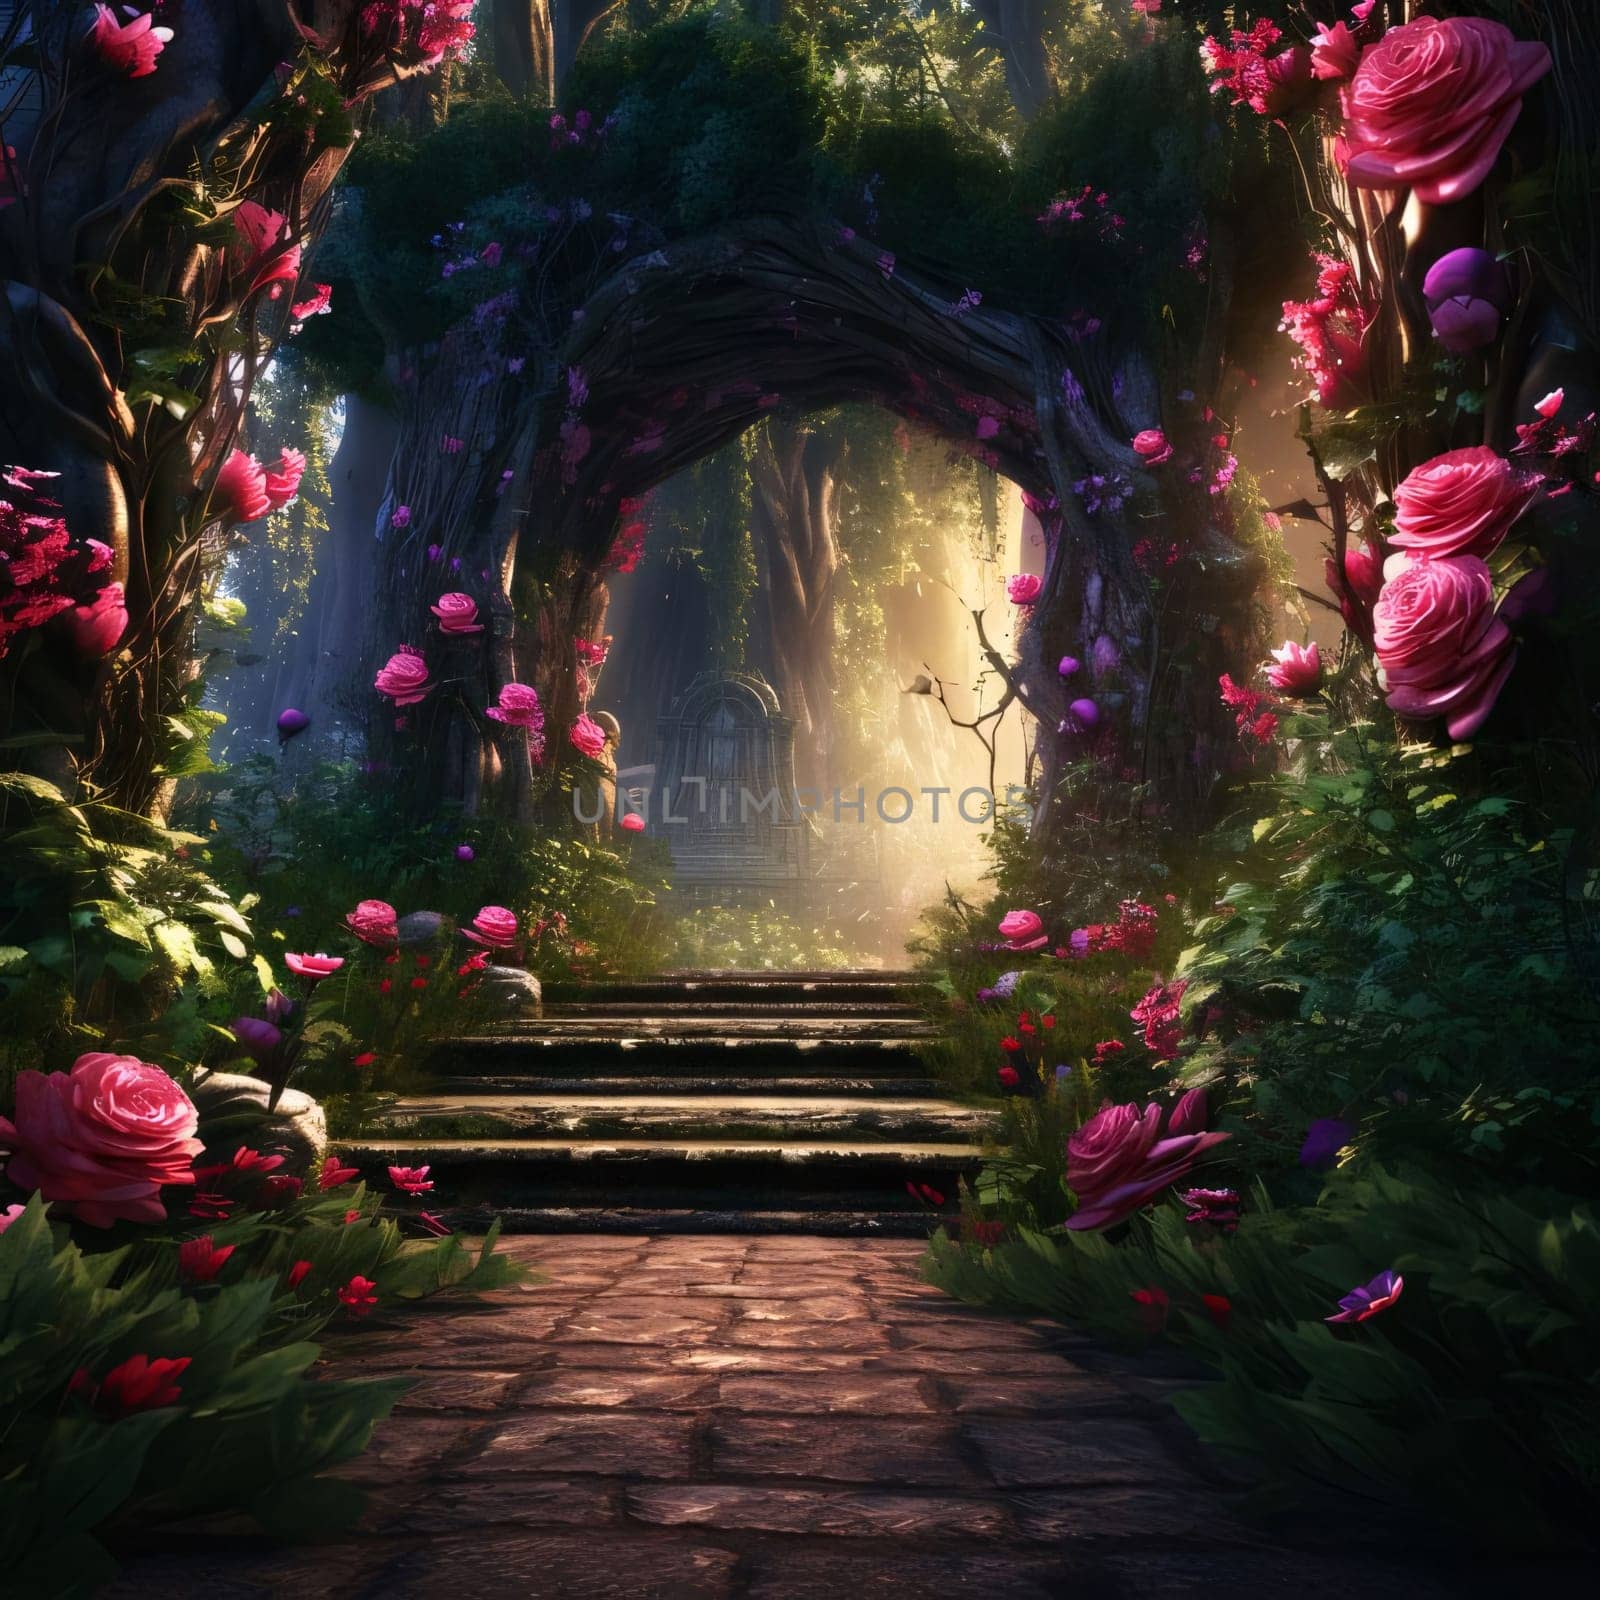 The stairs and the road, the path in the rose garden, the sun's rays falling. Flowering flowers, a symbol of spring, new life. A joyful time of nature waking up to life.